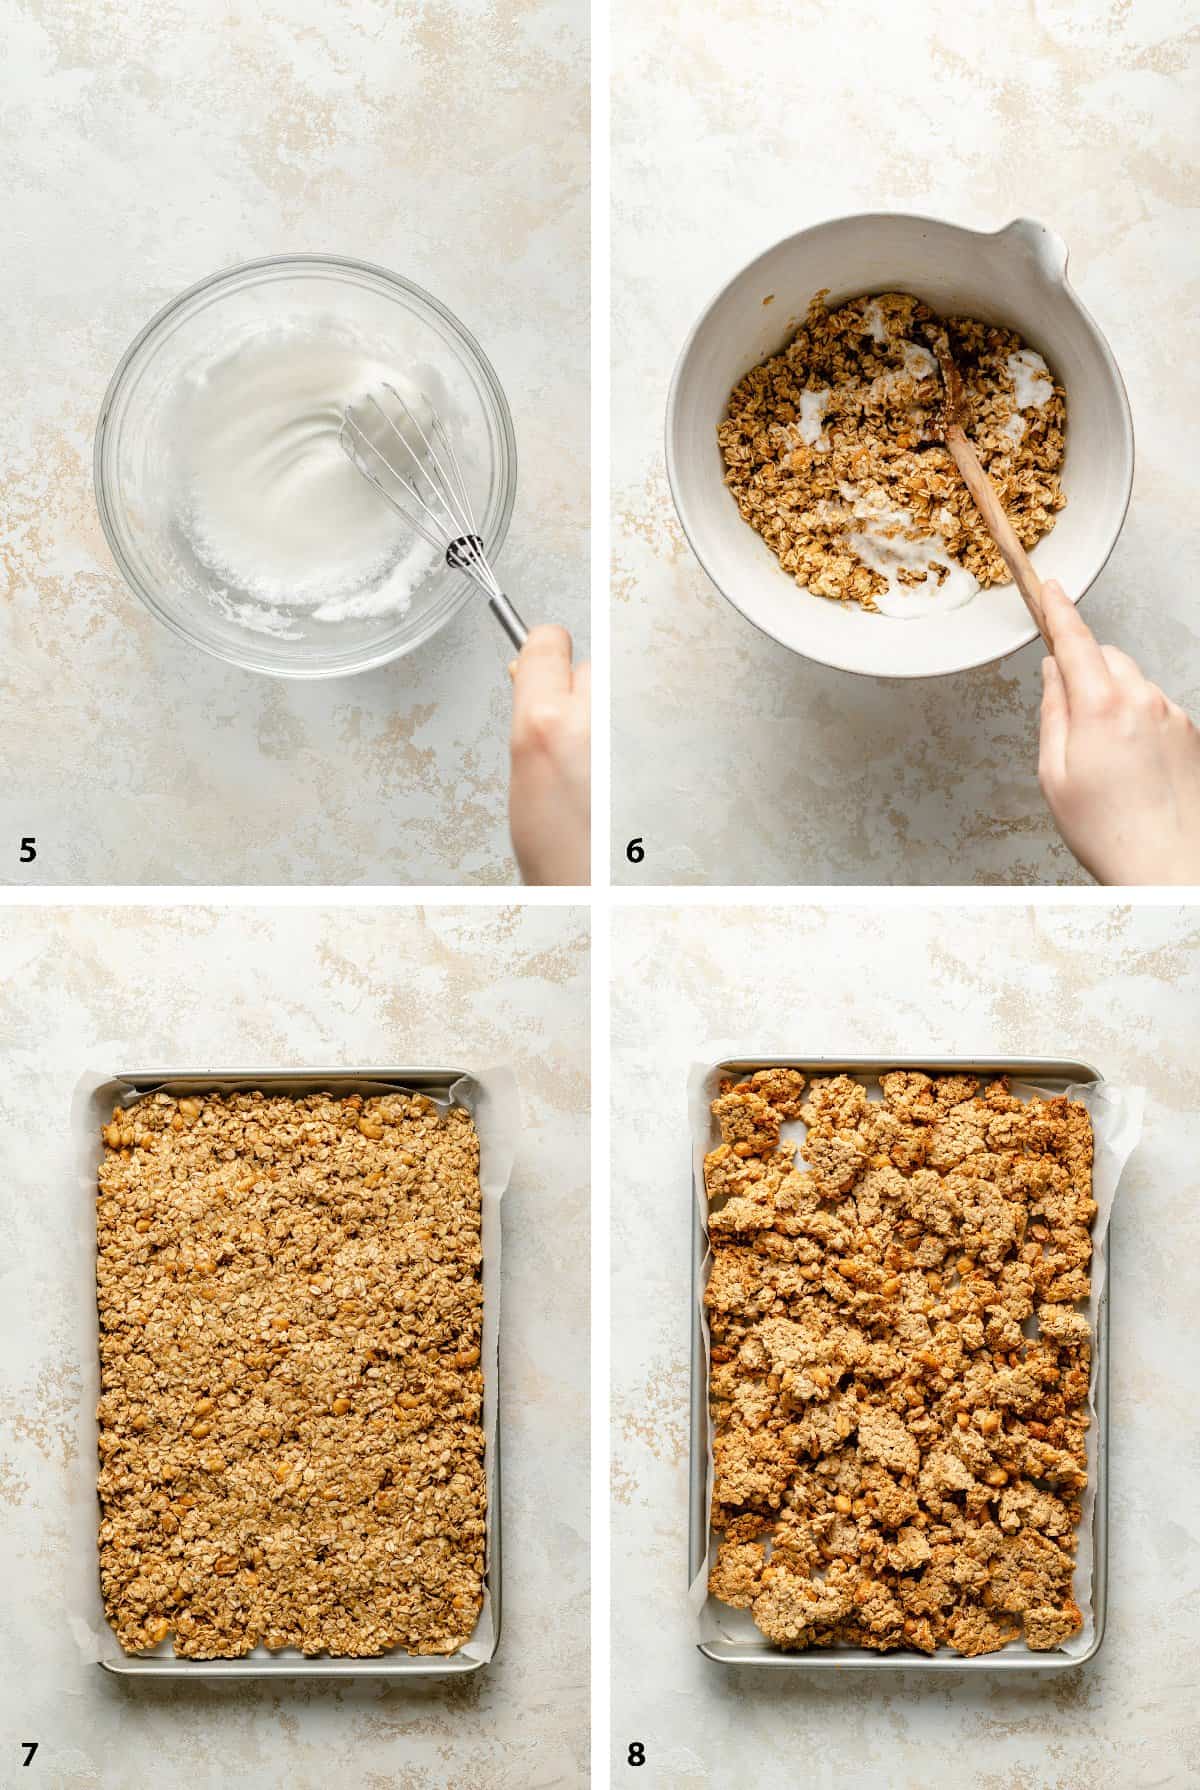 Process steps of stirring in egg whites and baking granola on a baking sheet.